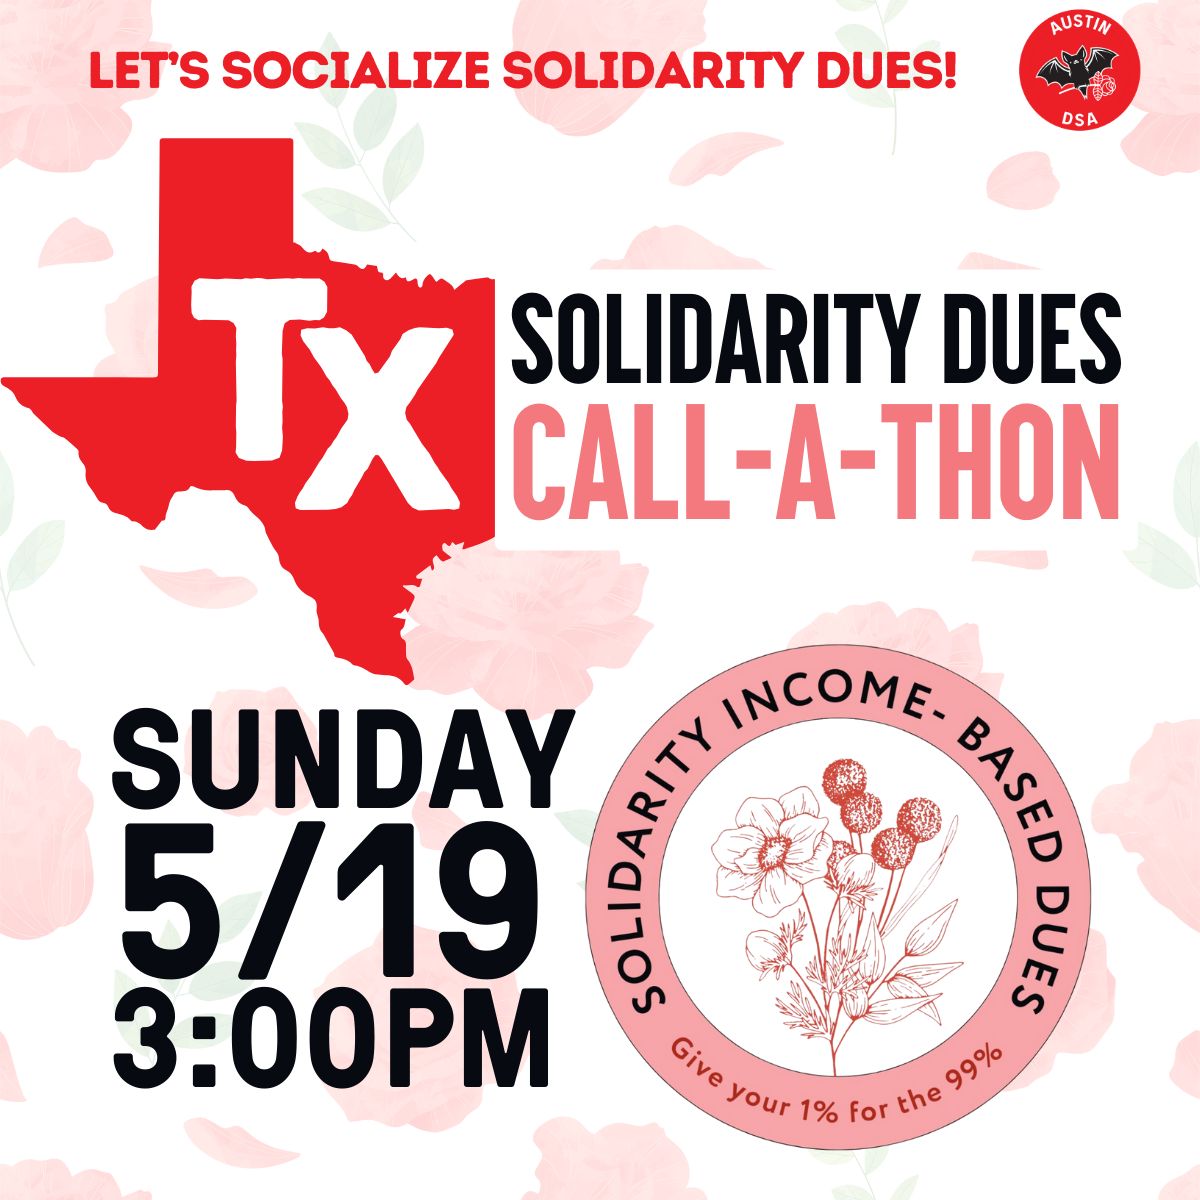 Let's socialize Solidarity Dues! Our chapter is helping organize a Texas Solidarity Dues Phonebank on 5/19. We'll be calling members to ask them to contribute 1% of their income to DSA as Solidarity Dues. RSVP: buff.ly/44GW0dA